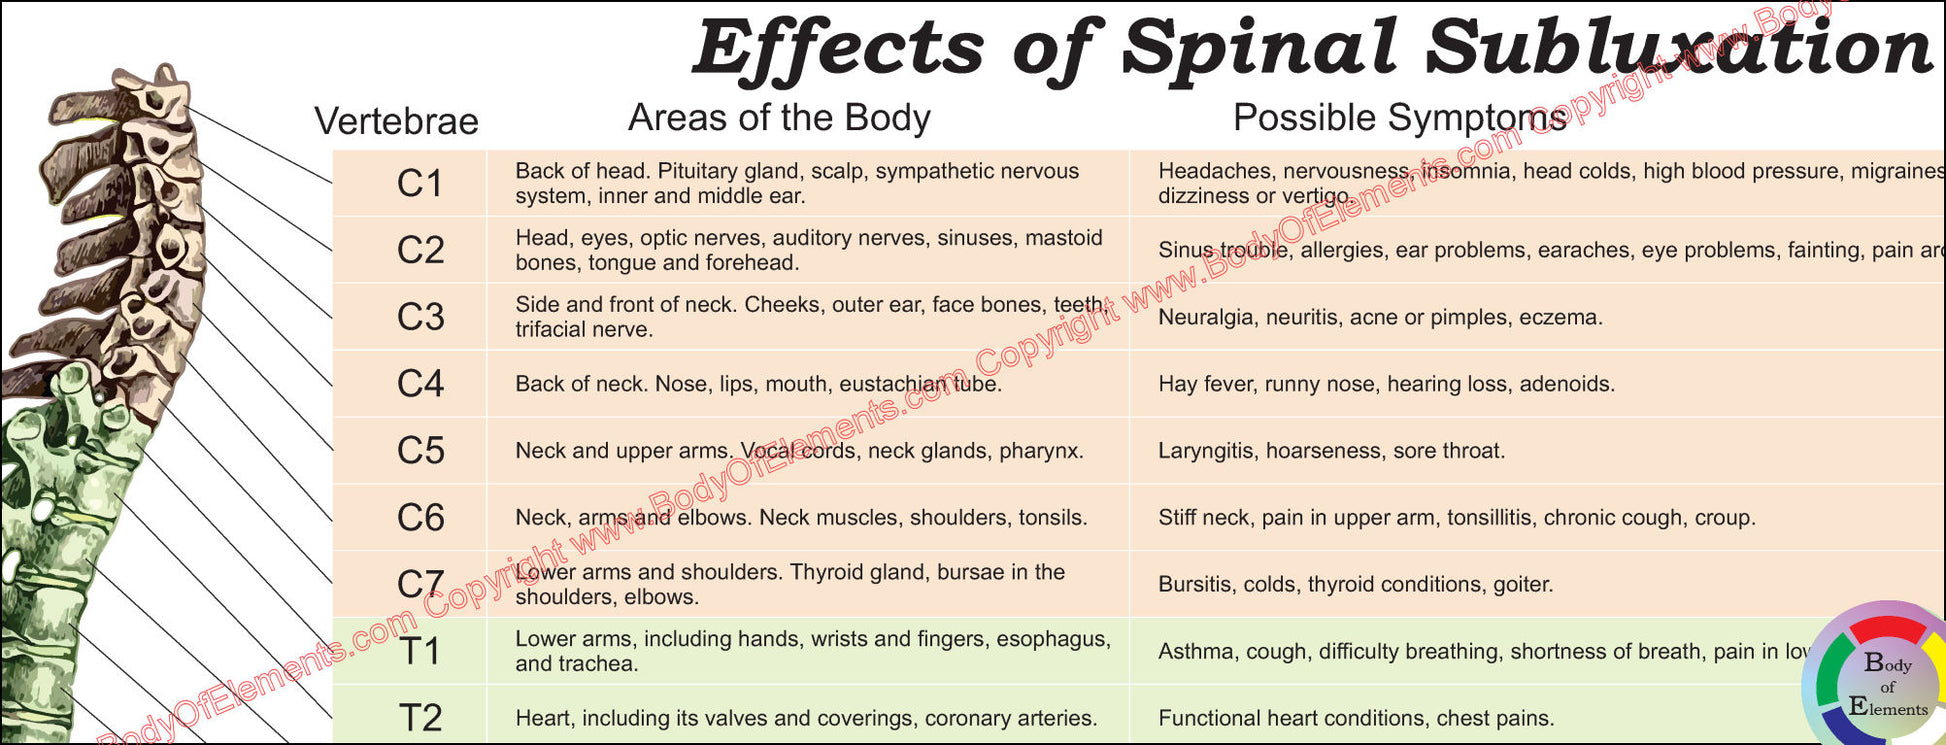 Cervical spine effects of spinal subluxation chart